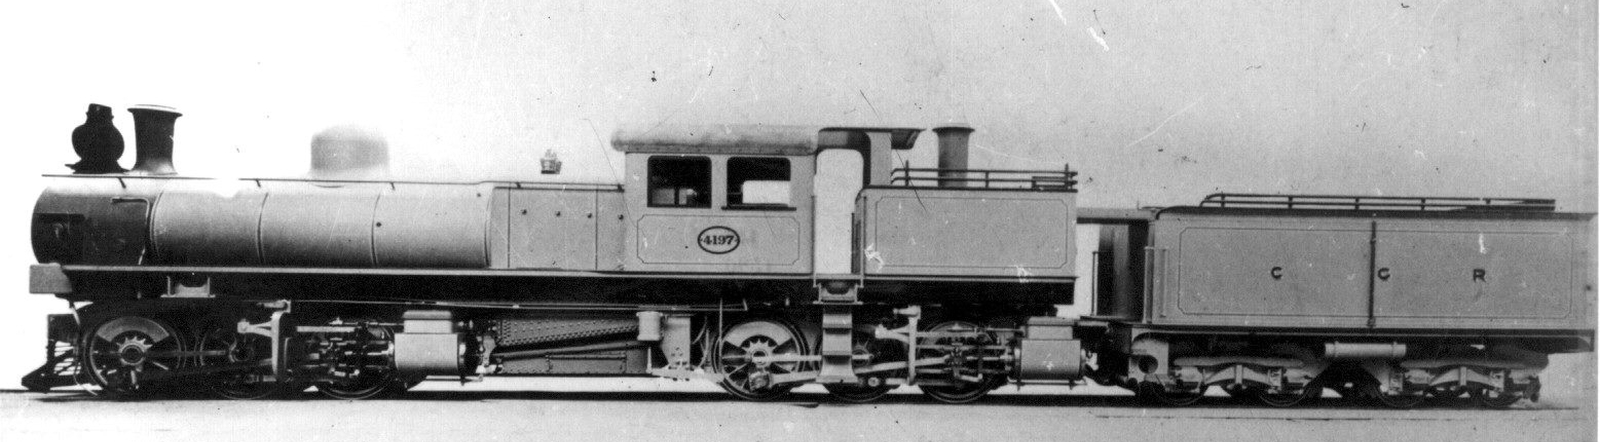 CGR No. 800 on a factory photo with serial number 4197 written on it